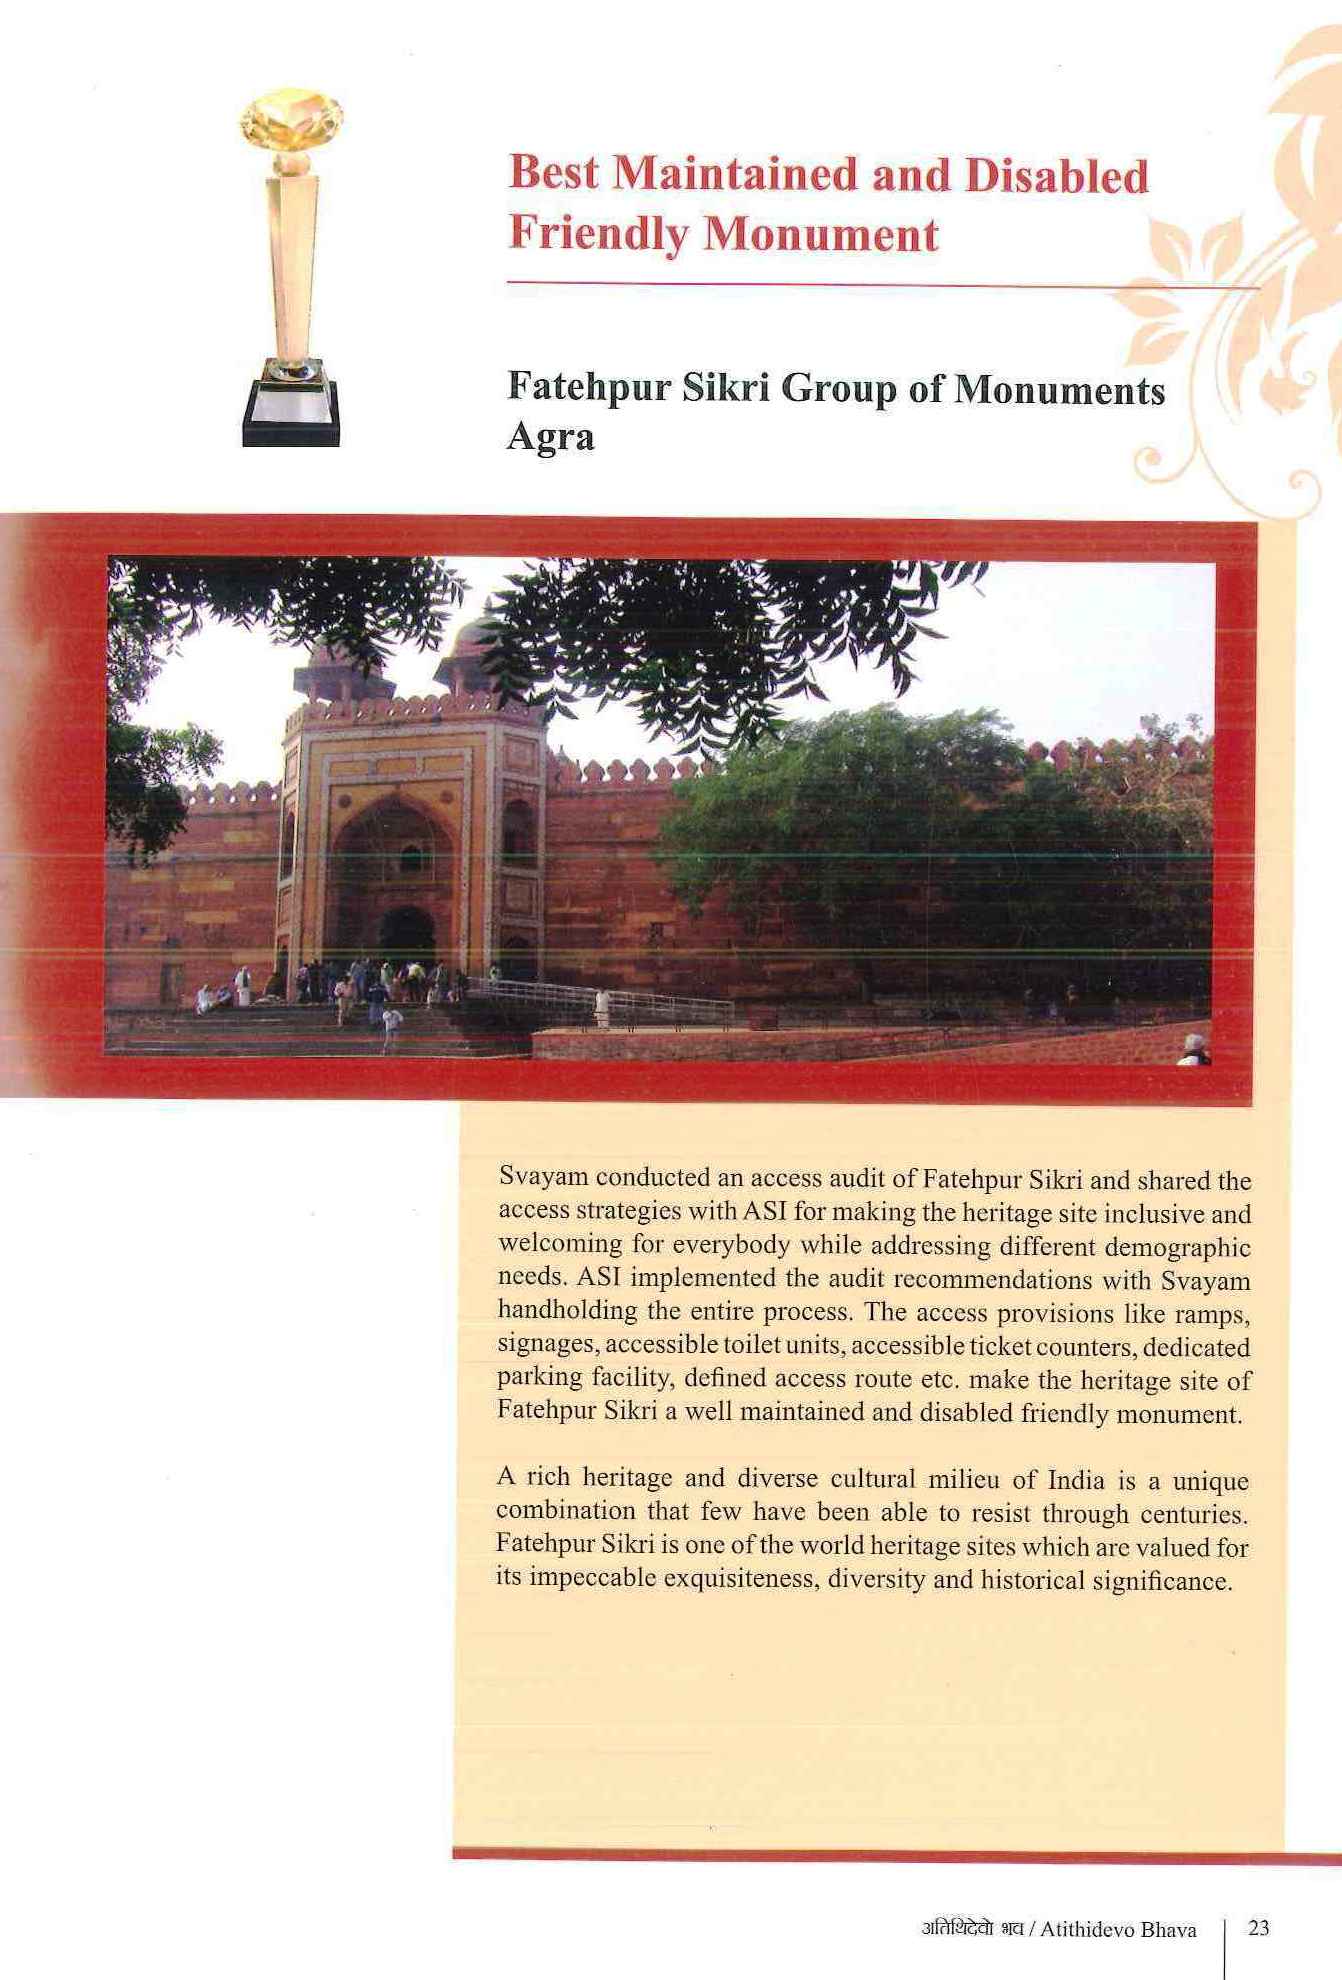 an image of Citation for Best Maintained and Disabled Friendly Monument - Fatehpur Sikri Group of Monuments Agra showing a huge ramp constructed at the Buland Darwaza